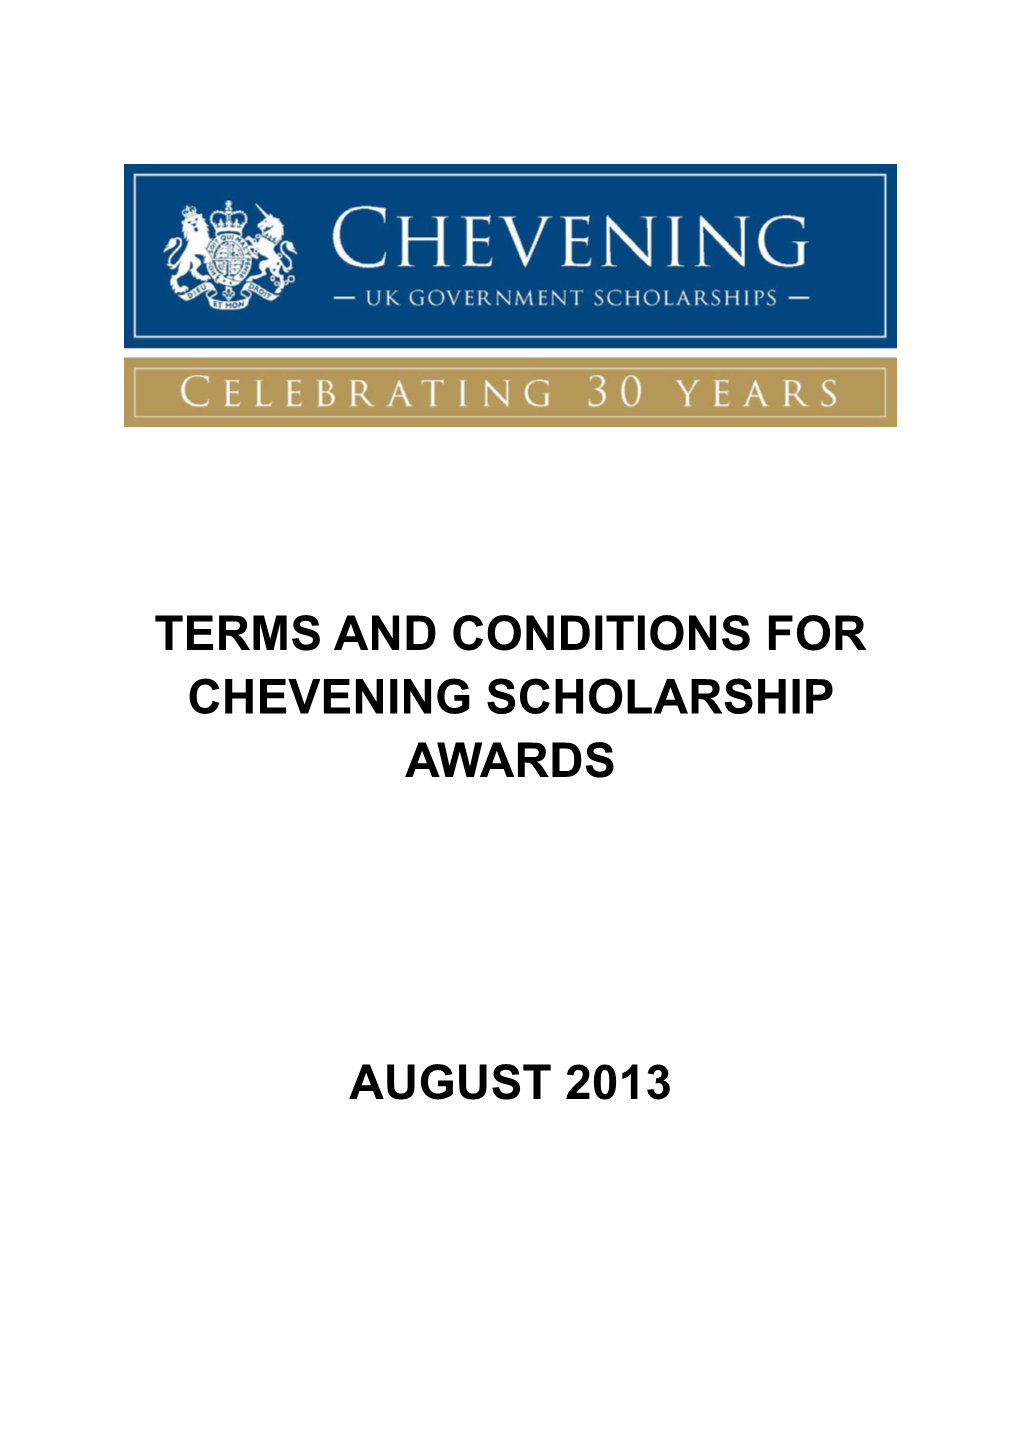 Terms and Conditions for Chevening Scholarship Awards